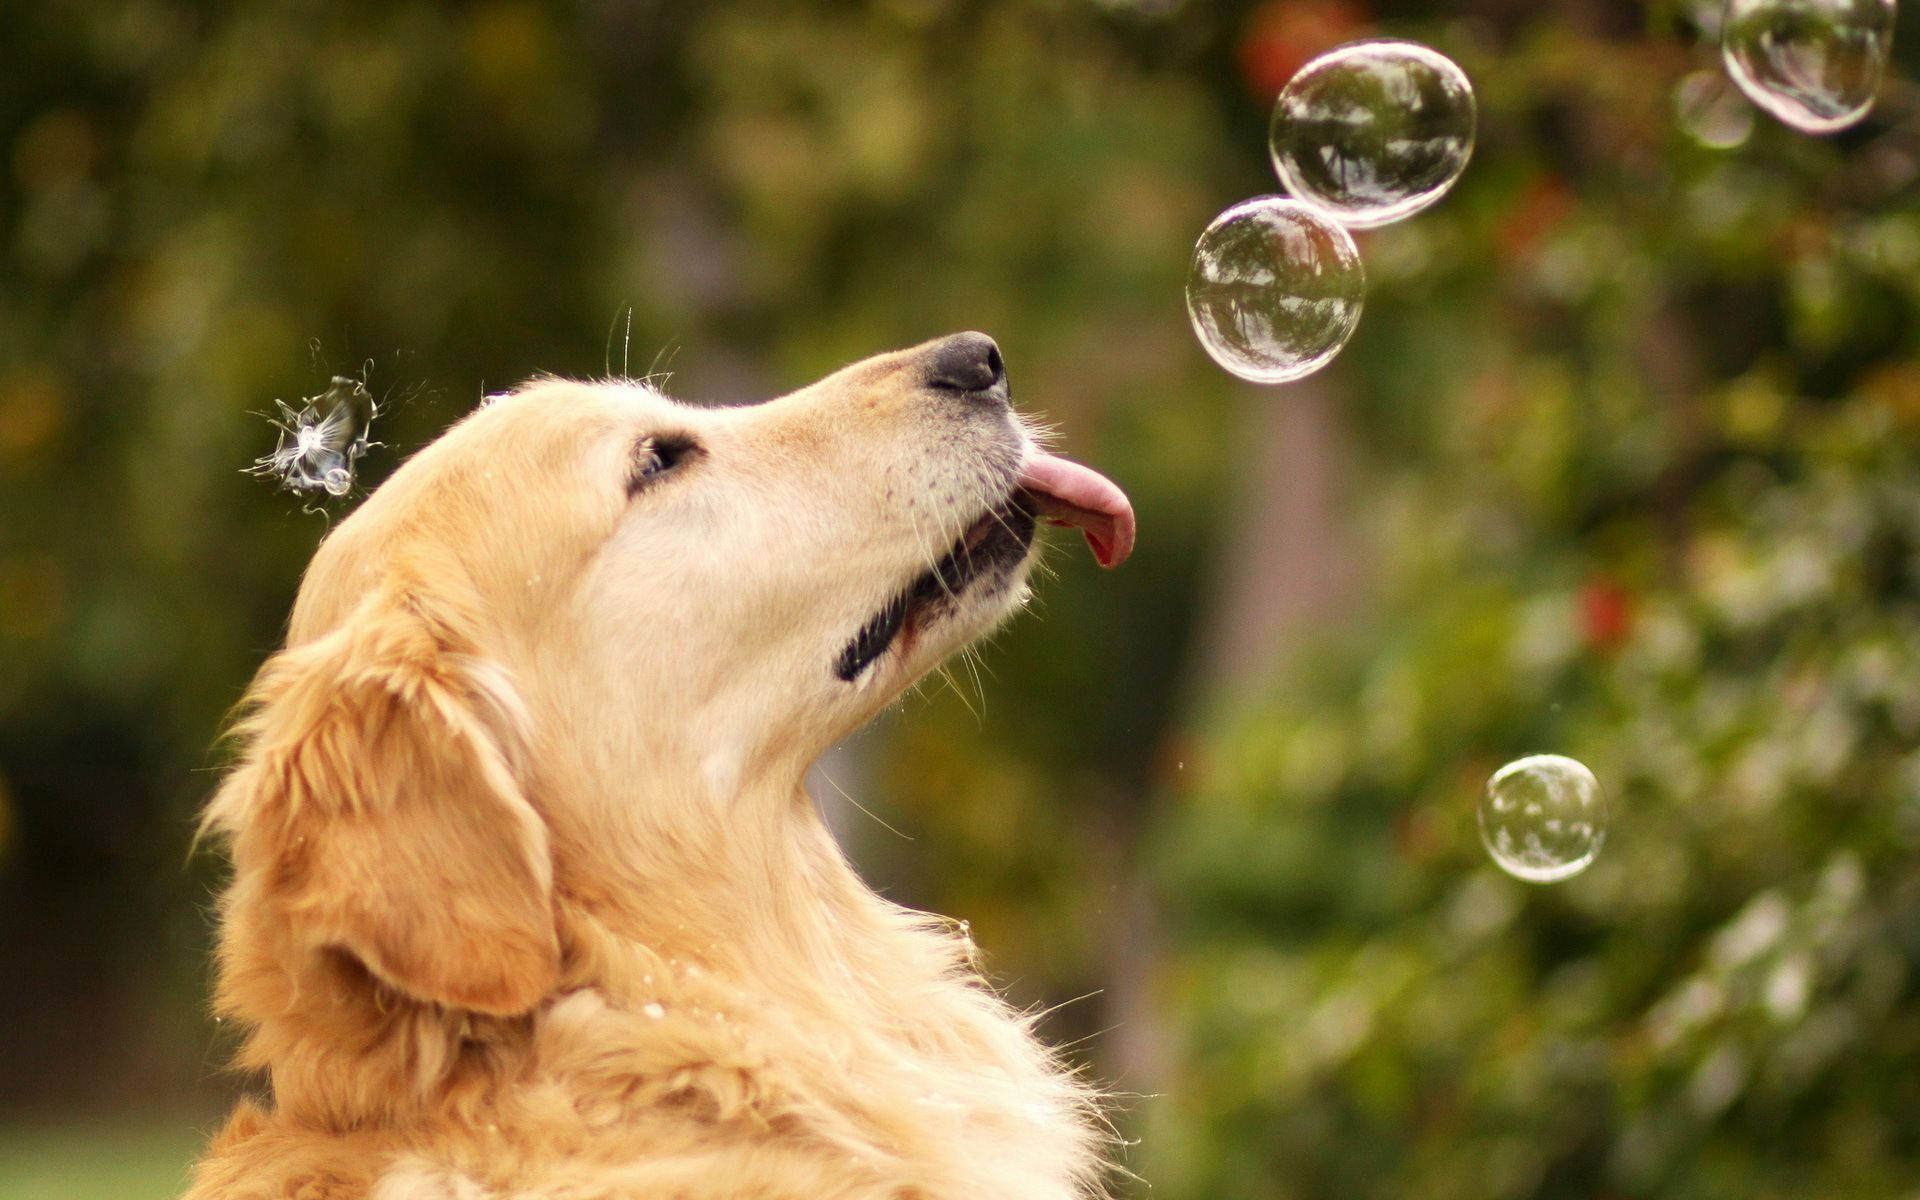 Cute Dog Popping Bubbles Wallpaper